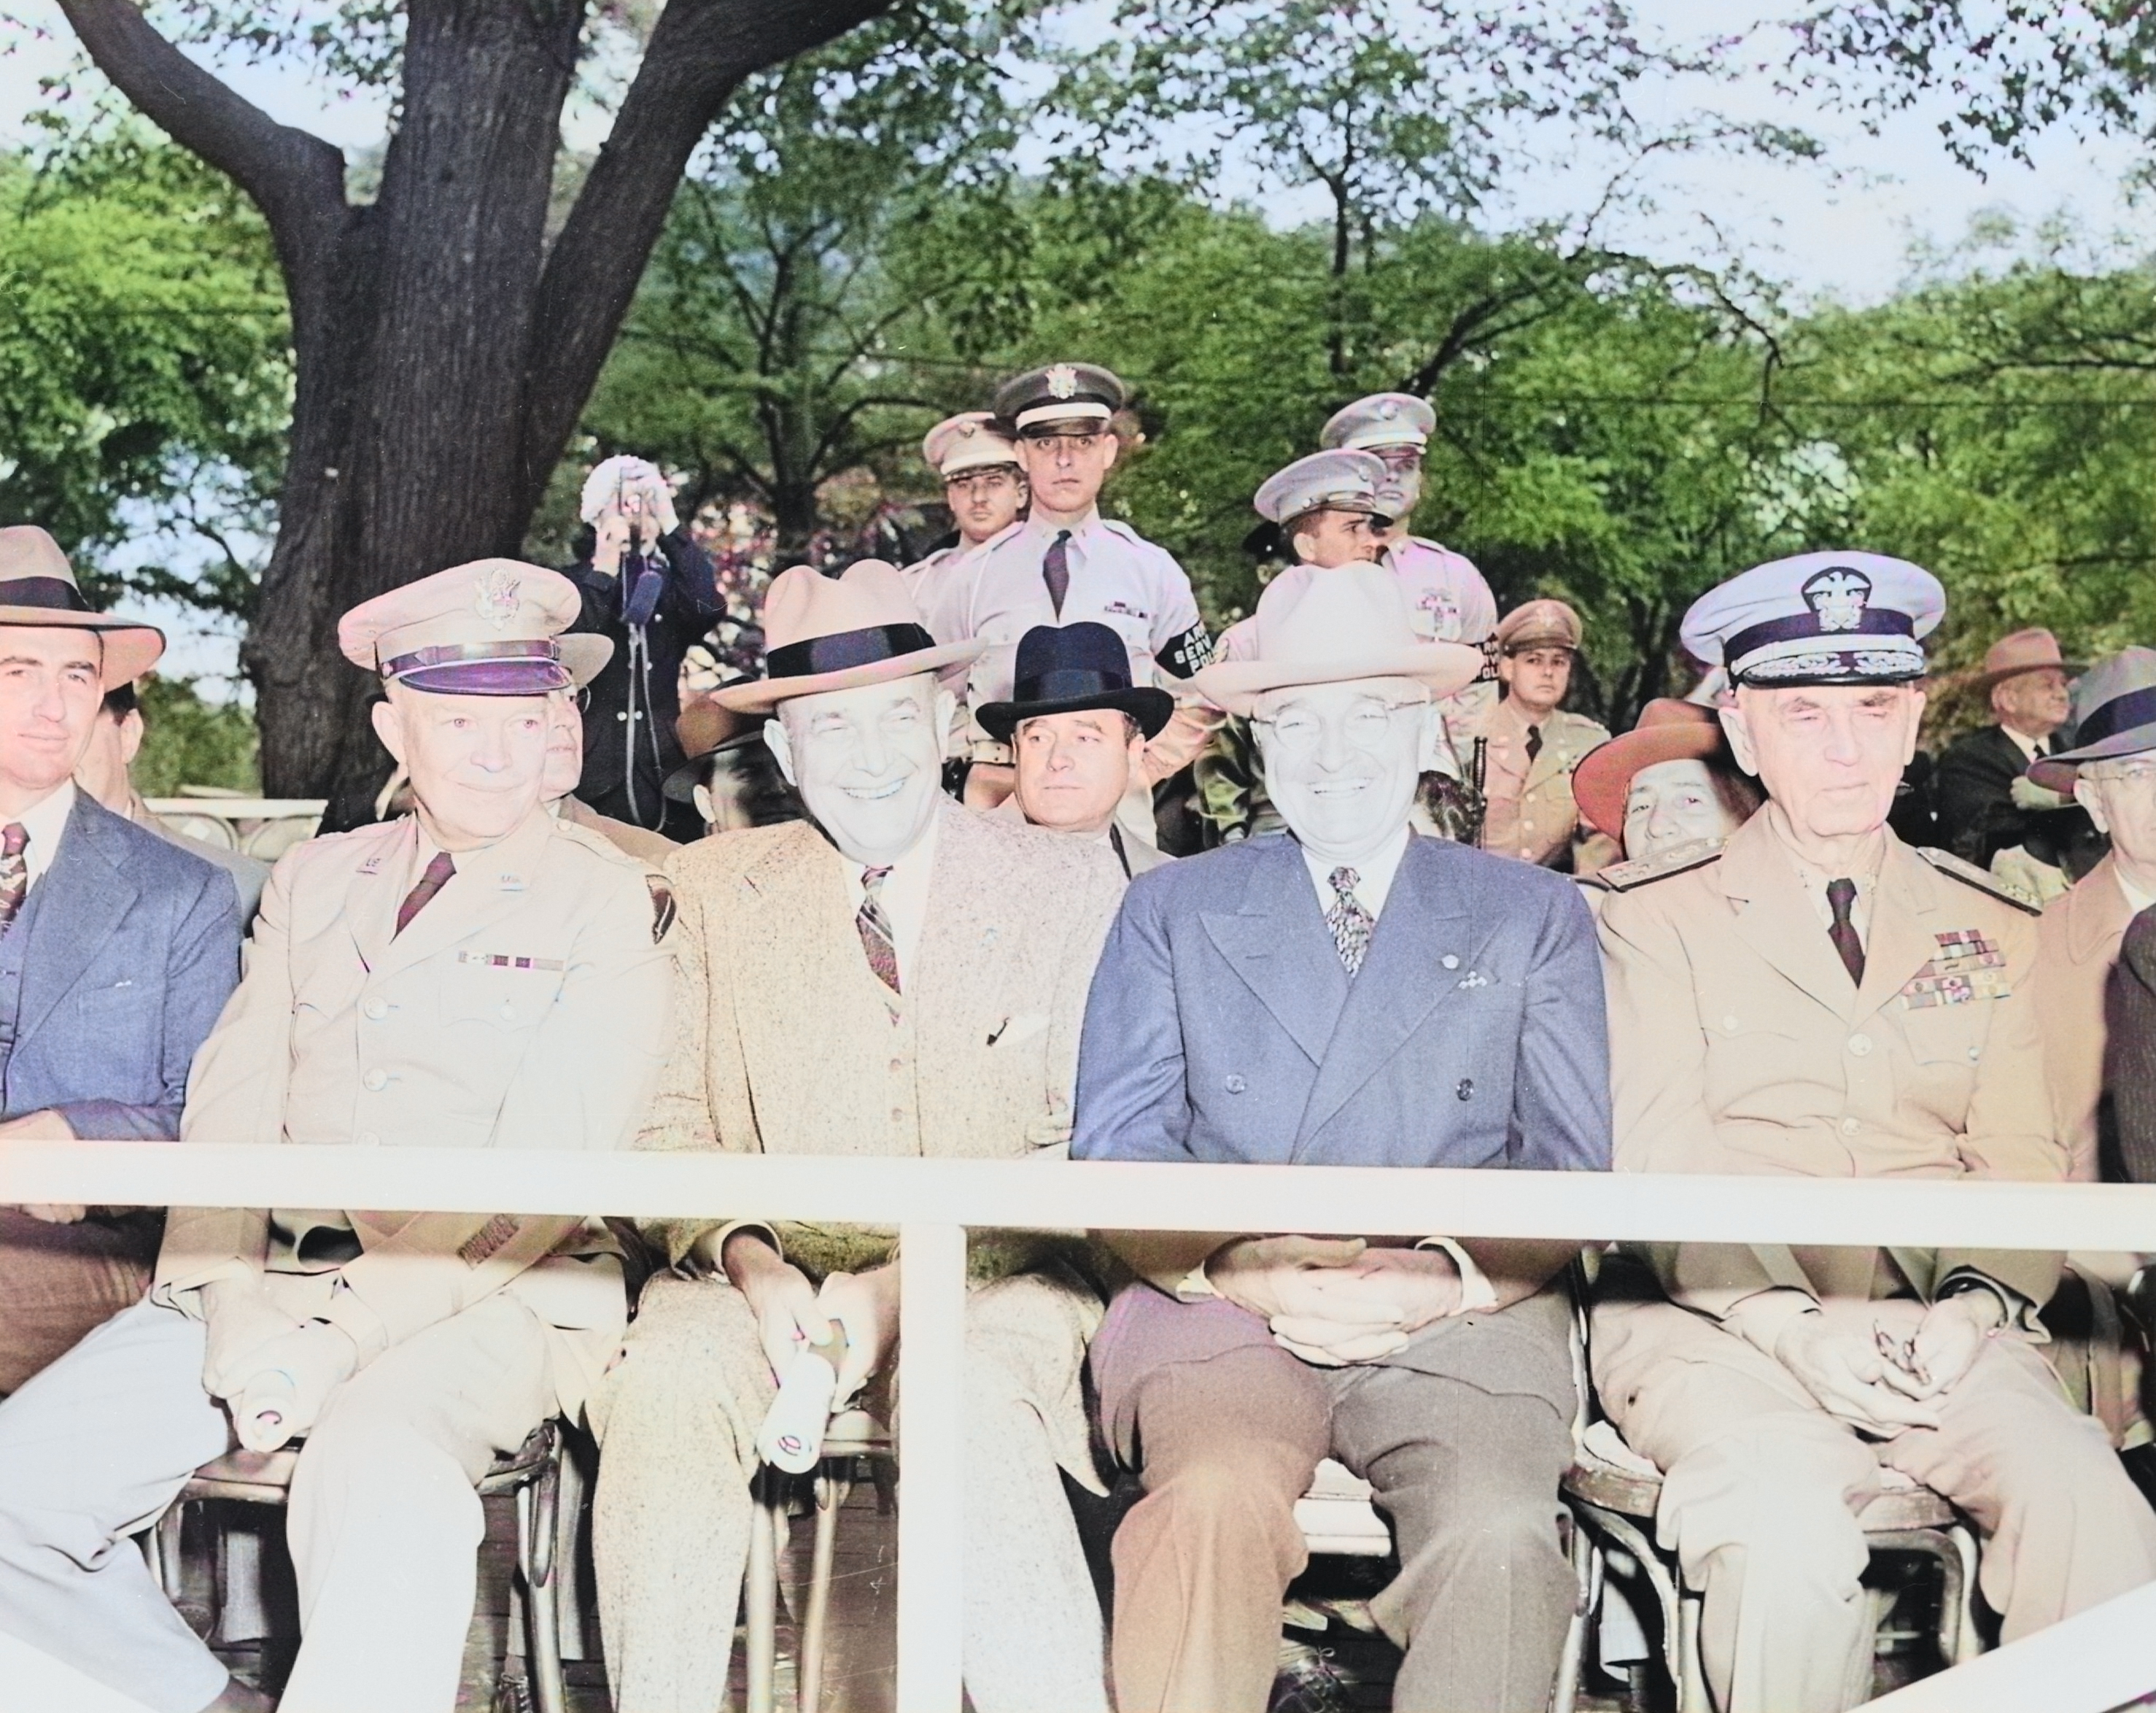 General Dwight Eisenhower, US Secretary of Defense Louis Johnson, US President Harry Truman, and Admiral William Leahy at the Arm Forces Day parade, 20 May 1950, photo 1 of 2 [Colorized by WW2DB]